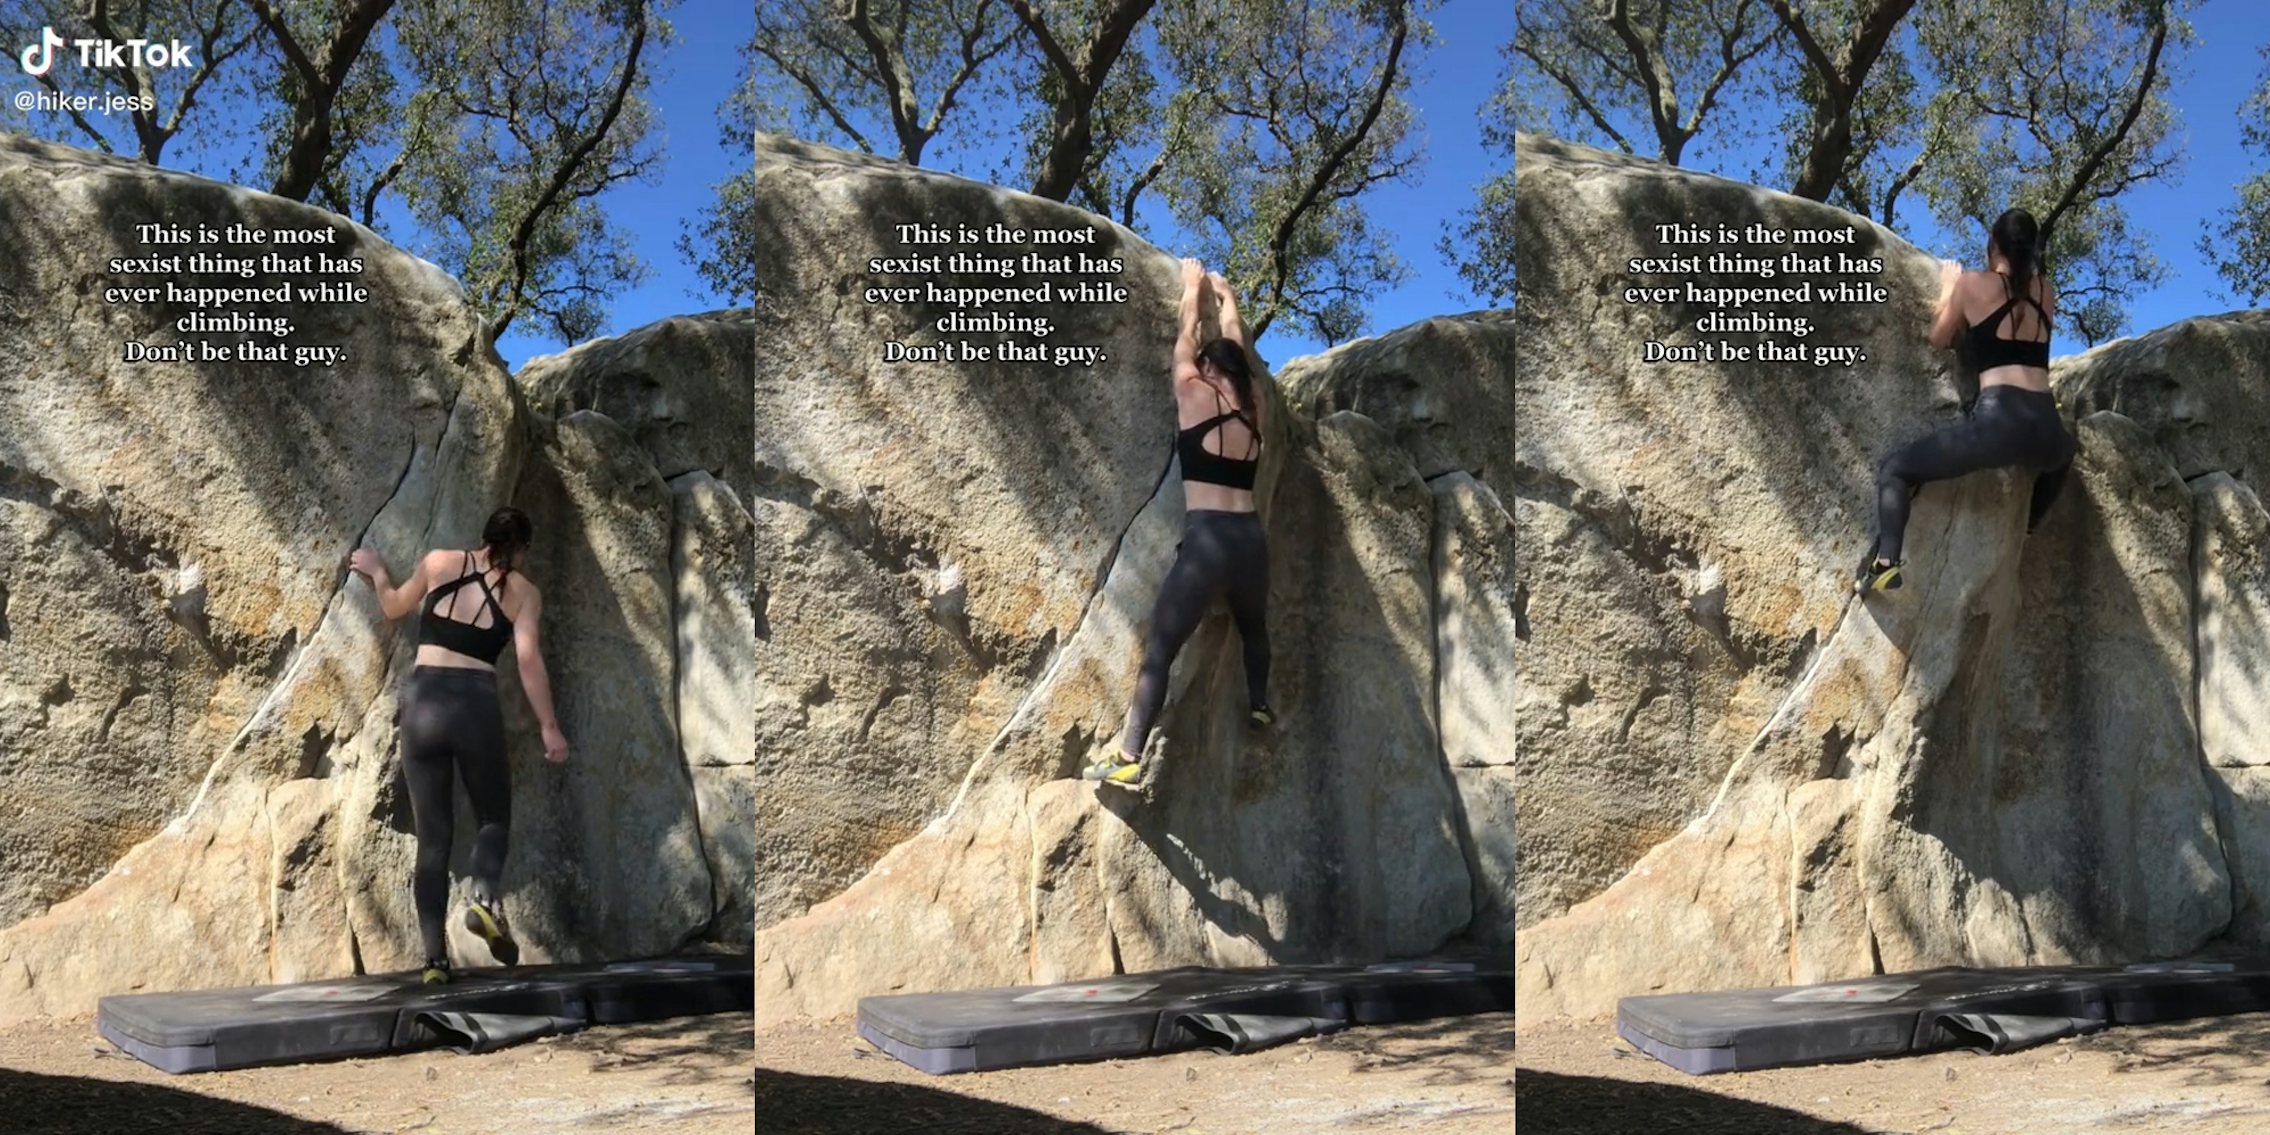 Woman climbing rock with caption 'this is the most sexist thing that has ever happened while climbing. Don't be that guy.'